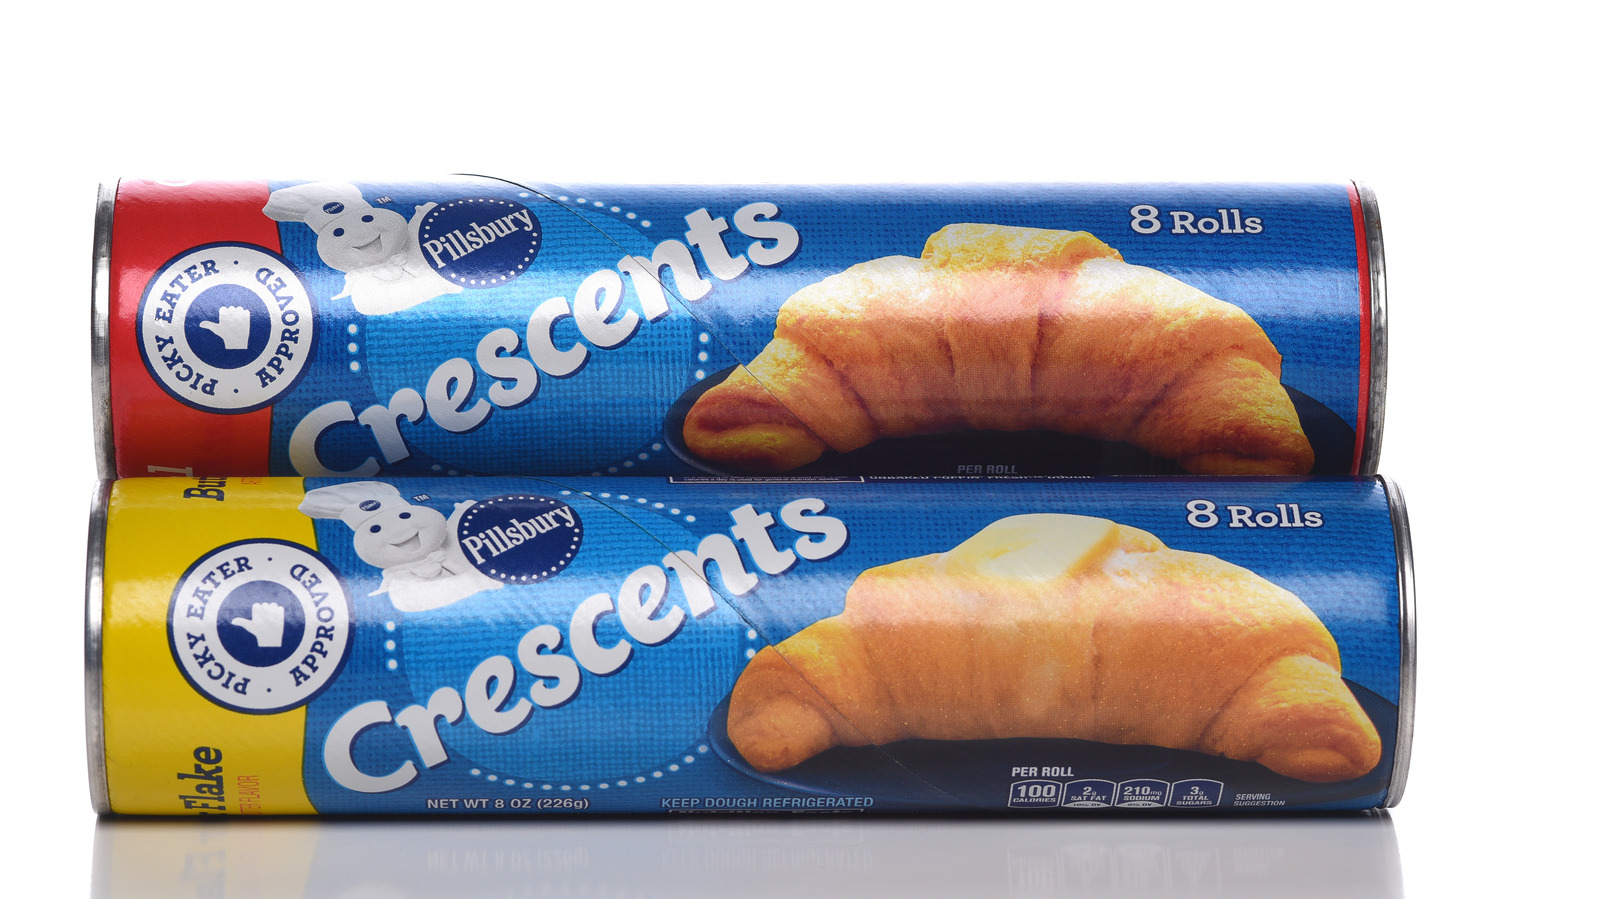 20 Clever Ways To Use Canned Crescent Rolls